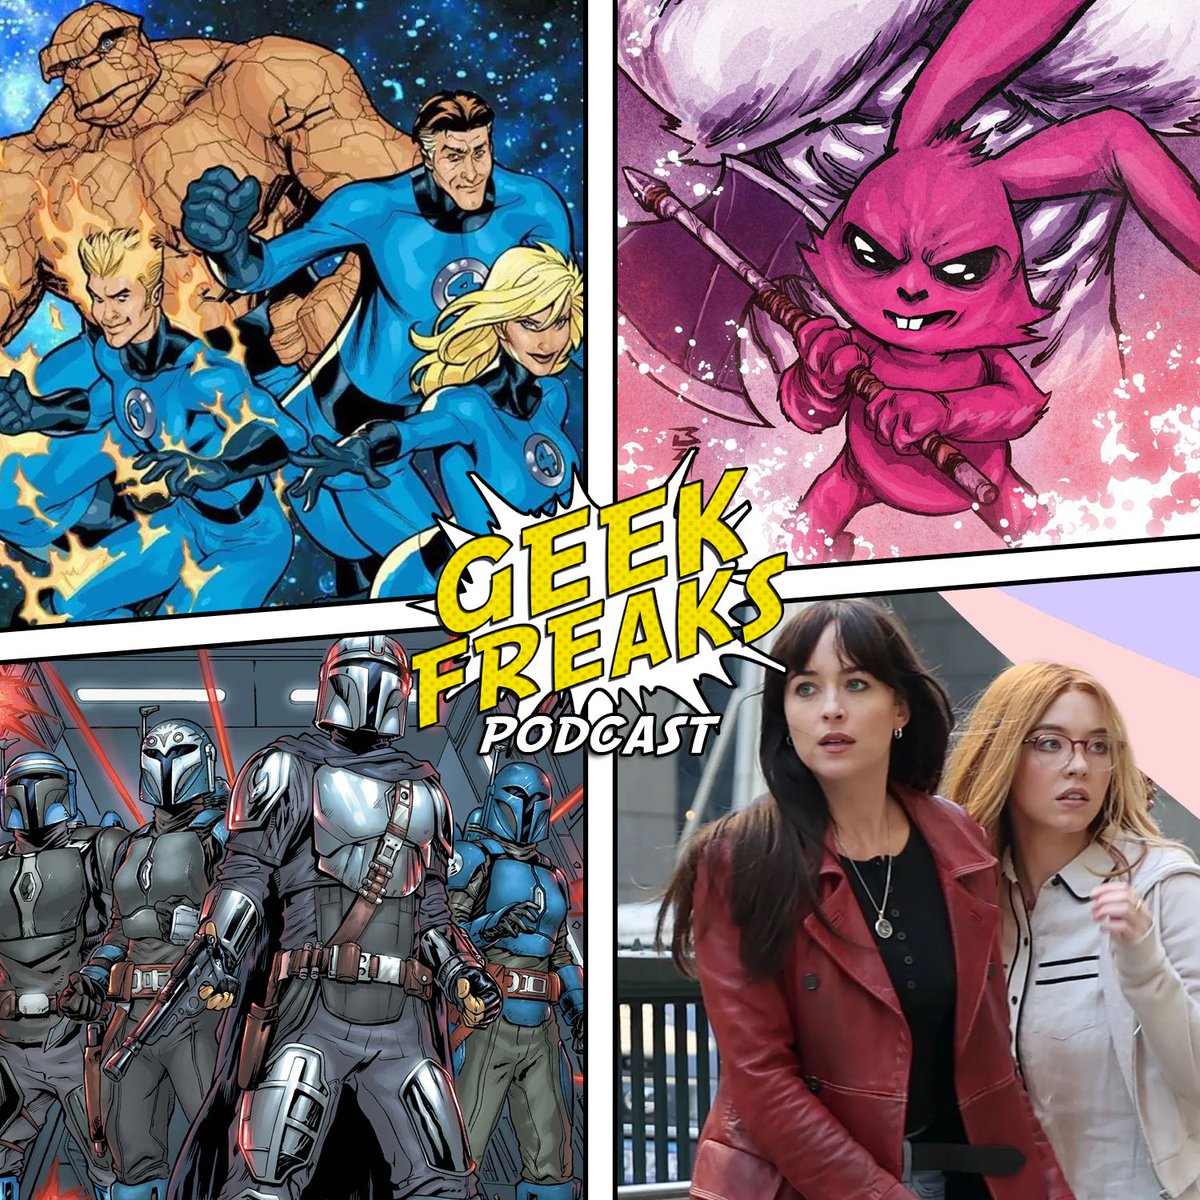 New Episode Alert! We're joined by Allen Dunford to talk about his new comic, 'Horus in Hell'. Plus, we've got updates on Marvel's Fantastic Four & X-Men '97, and our review of Madame Web! Tune in now: linktr.ee/GeekFreaks